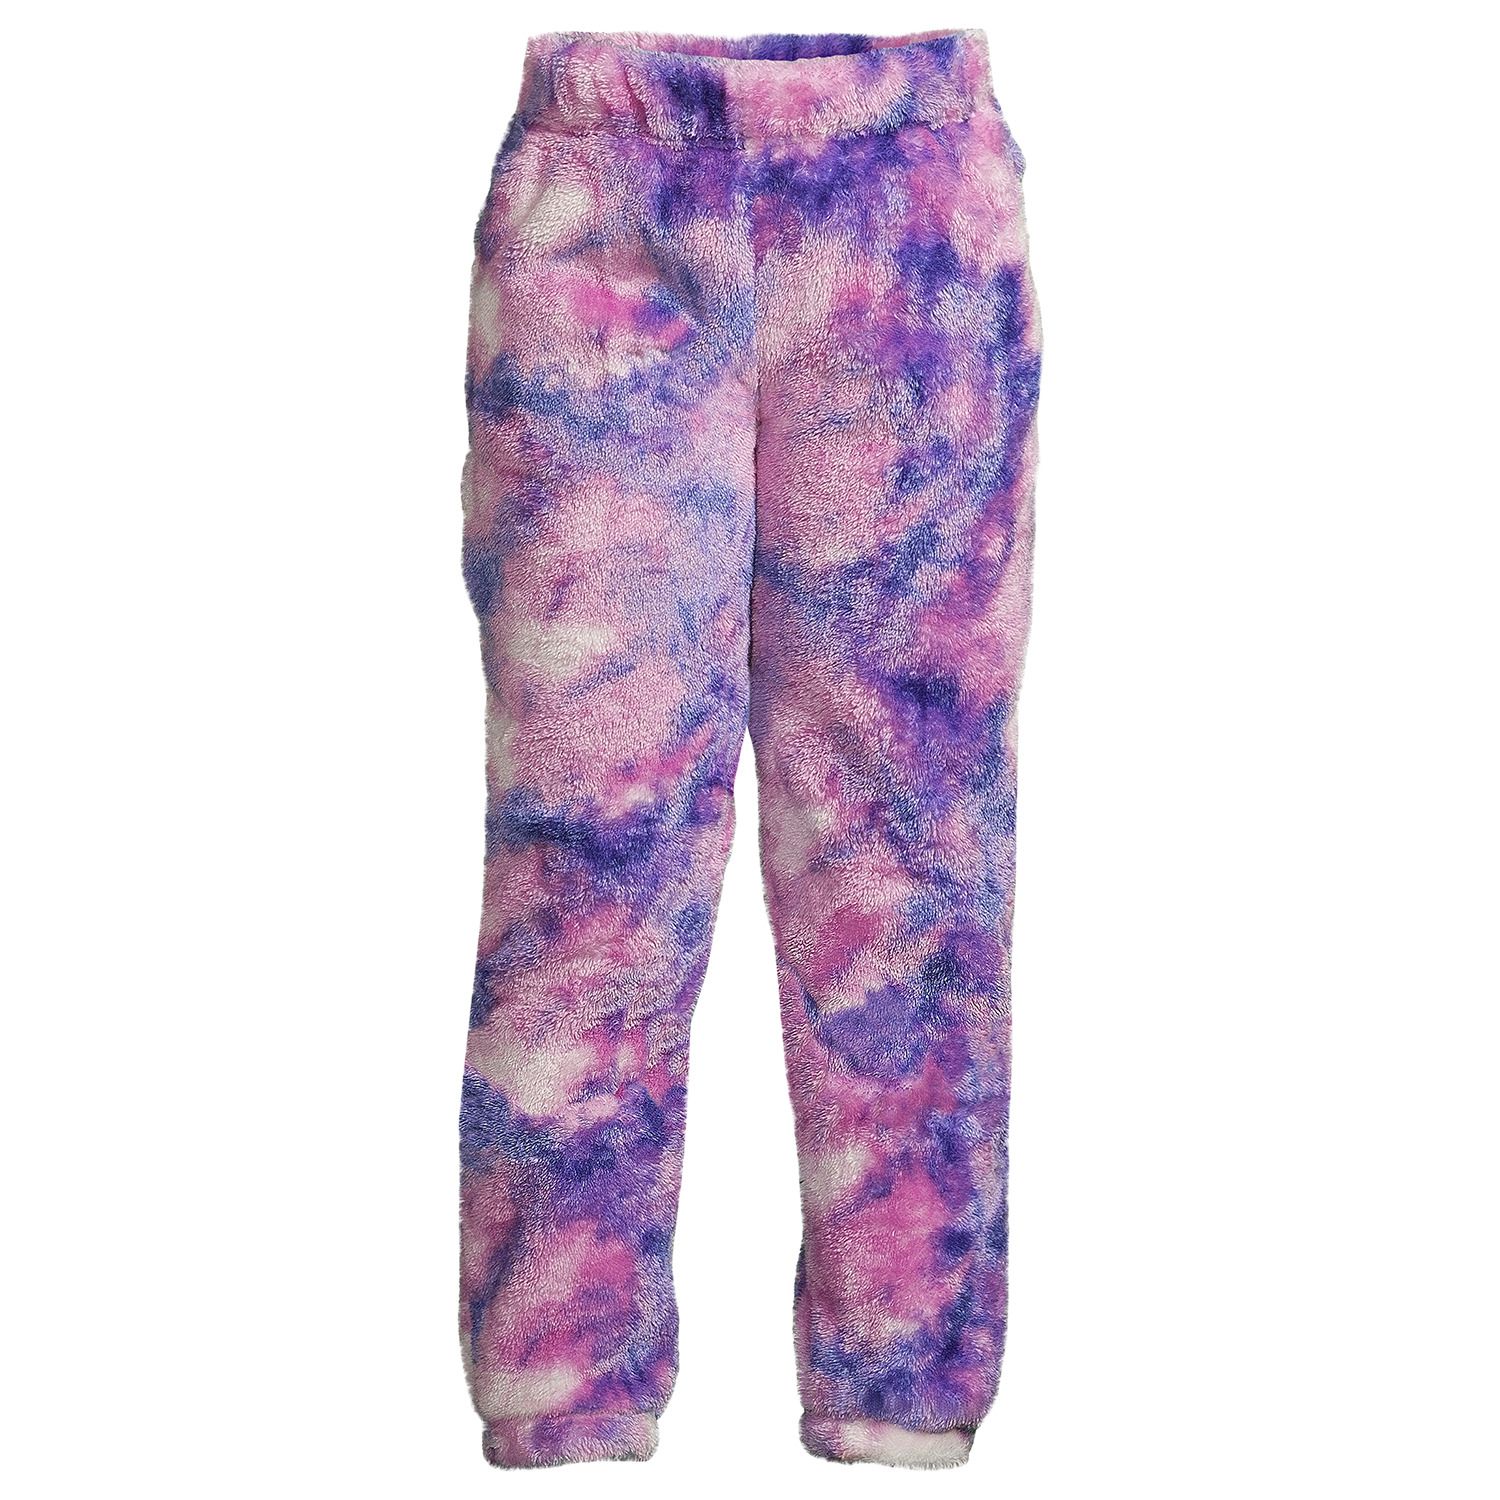 Image for Lands' End Girls 4-18 Fuzzy Jogger Pants at Kohl's.